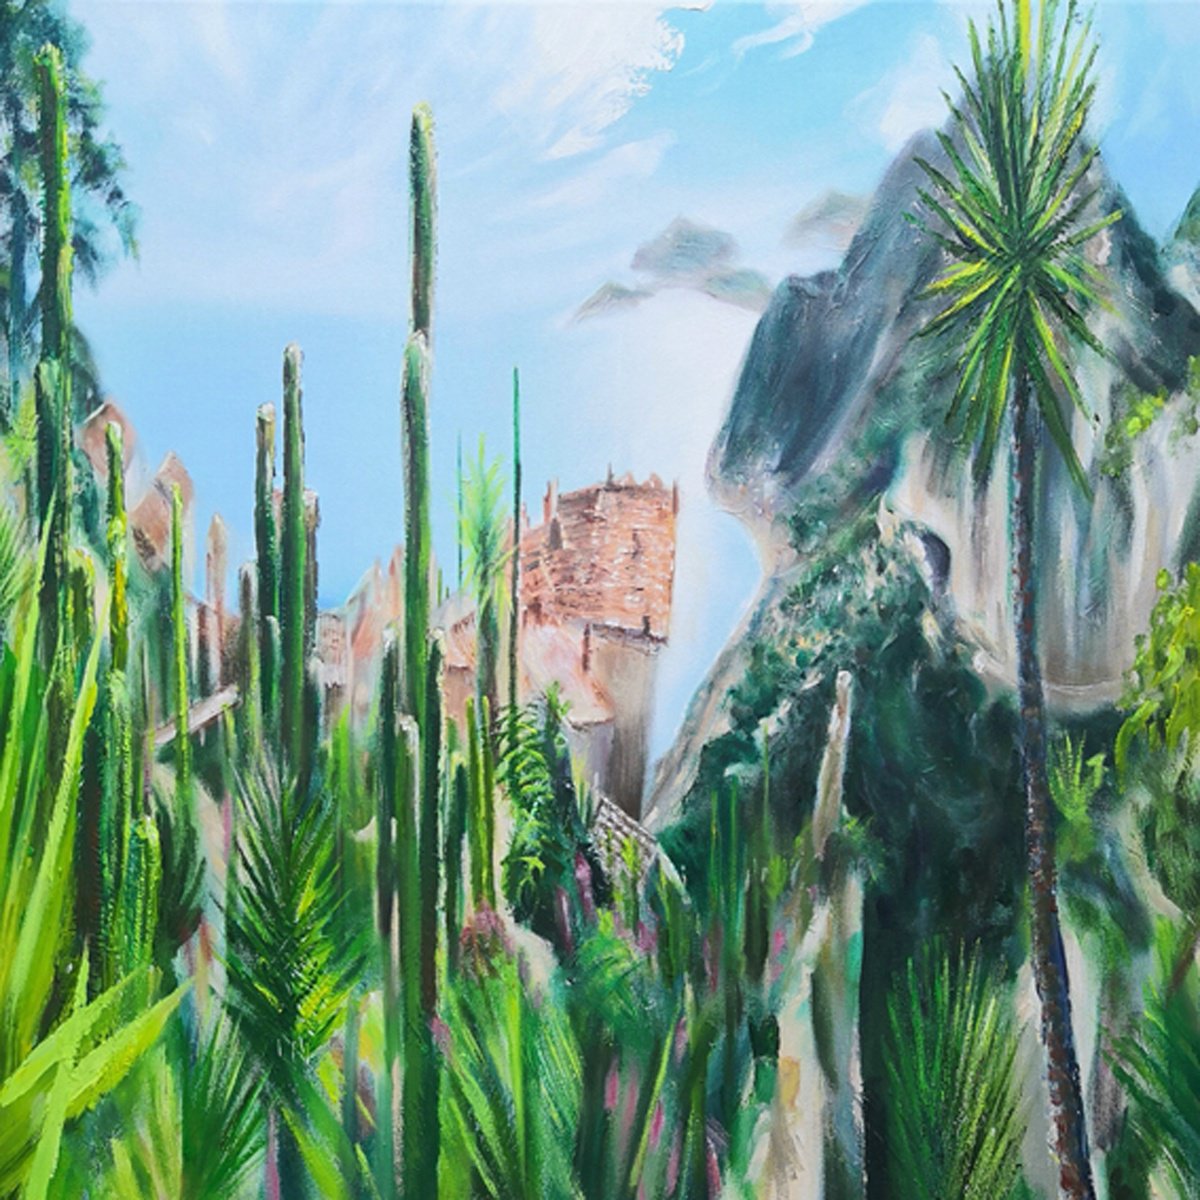 Le Jardin Exotique, Eze by Nick Pike